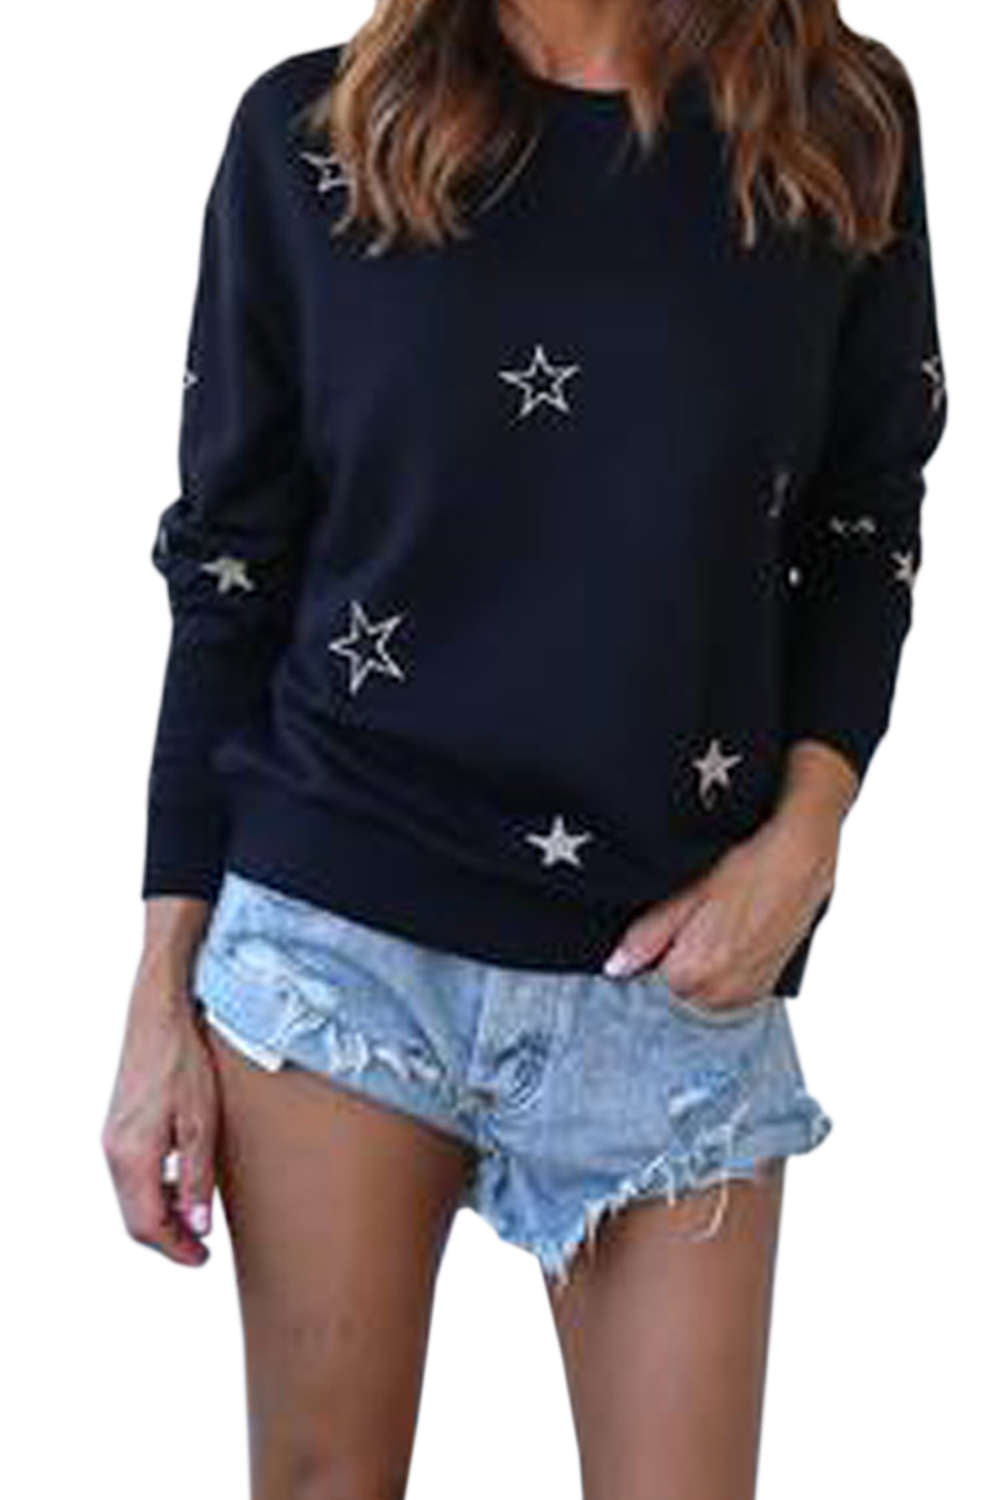 Iyasson Star Print Relaxed Fit Sweater